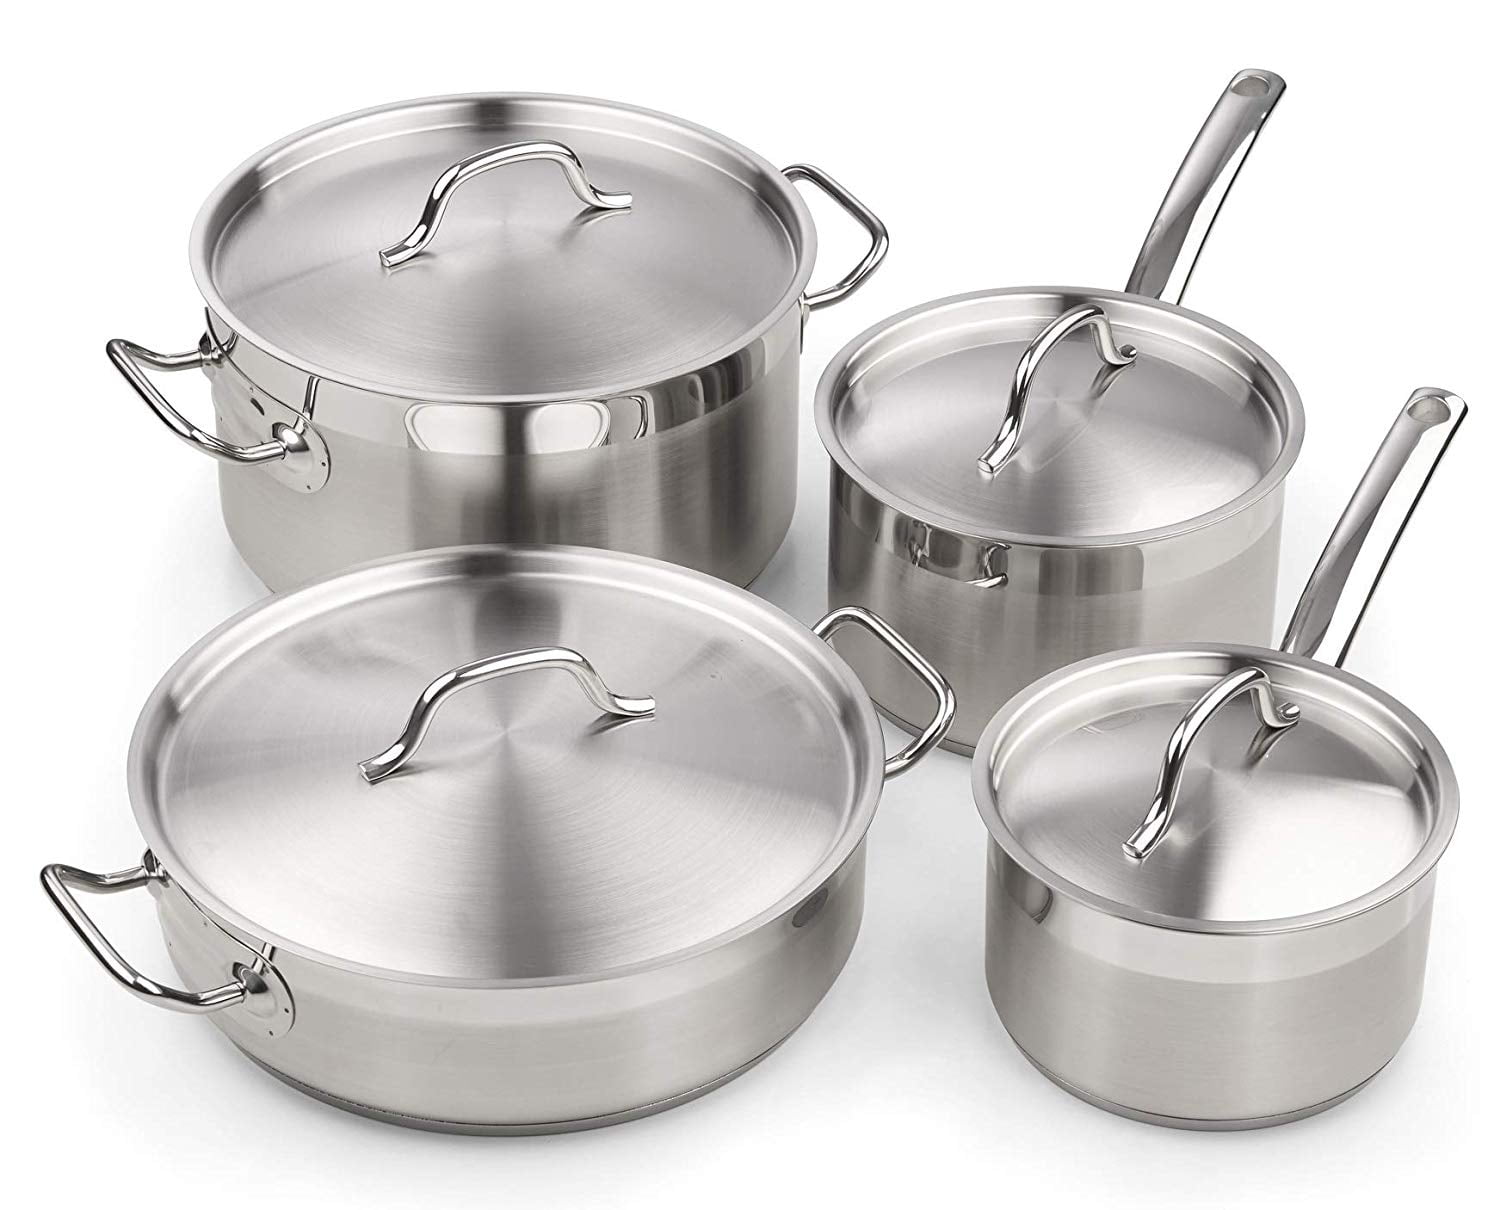 Rohi Cooks Standard Stainless Steel 16cm Saucepan with Lid